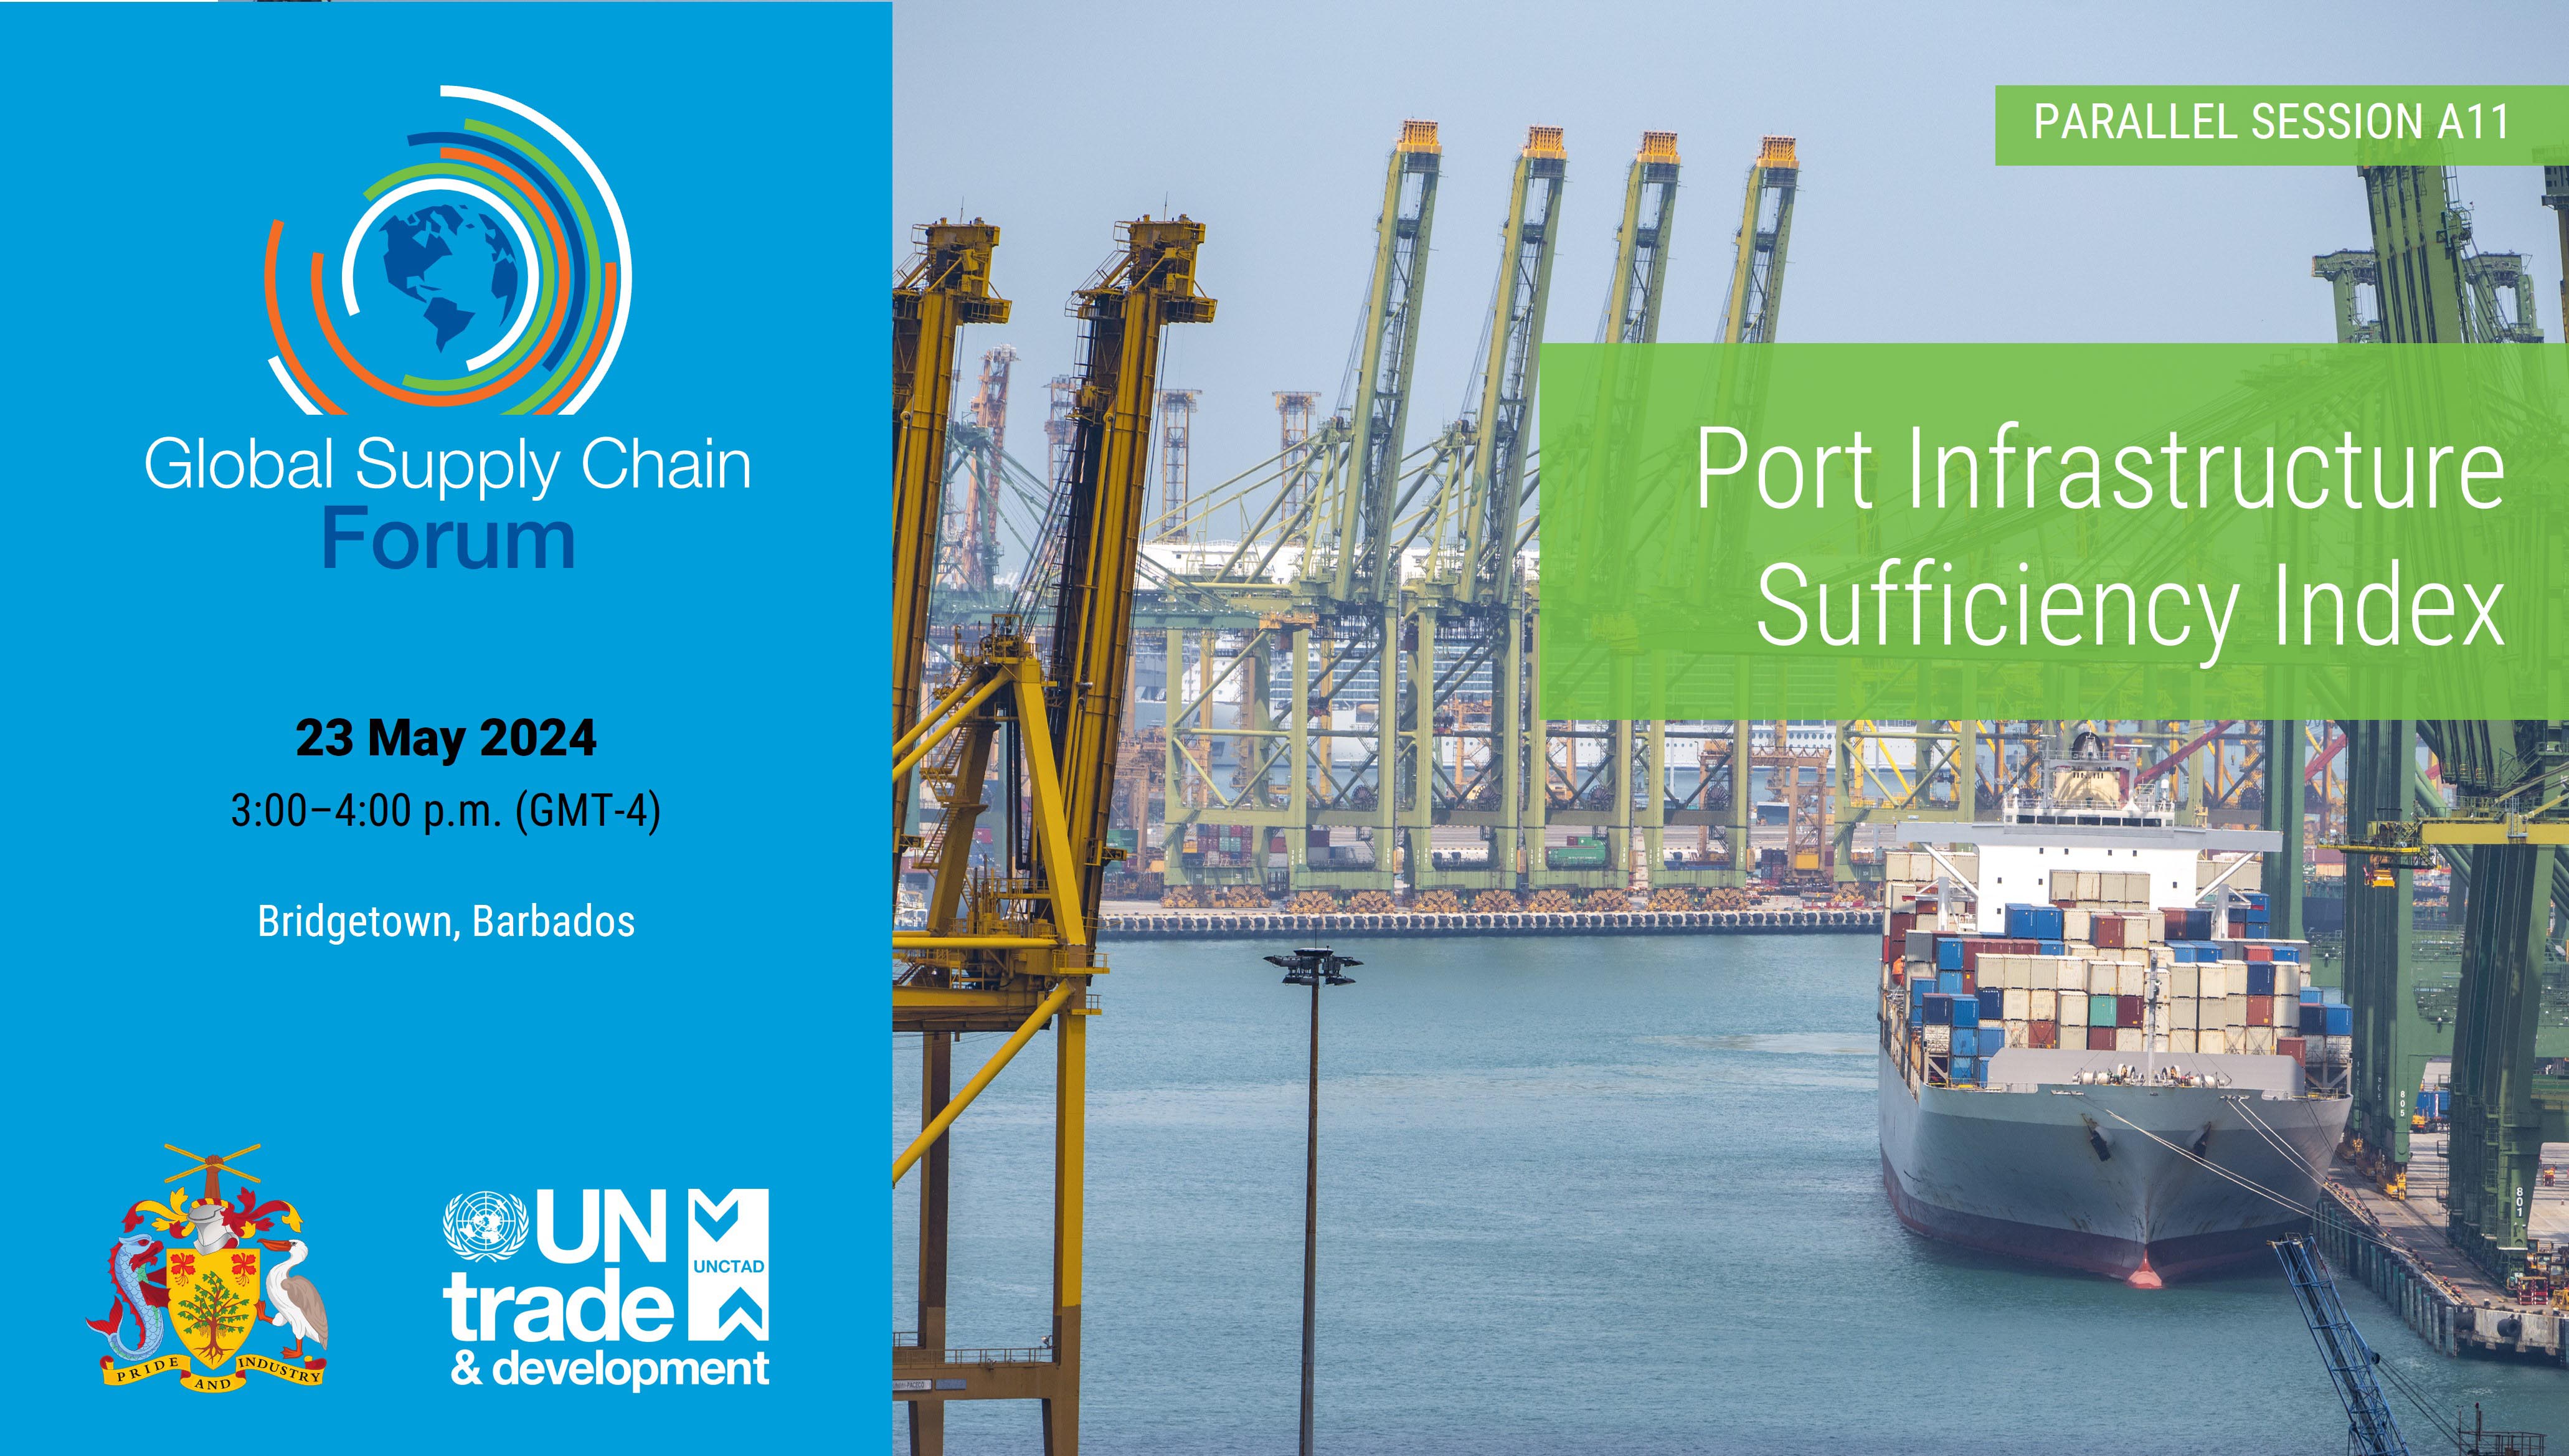 Port Infrastructure Sufficiency Index